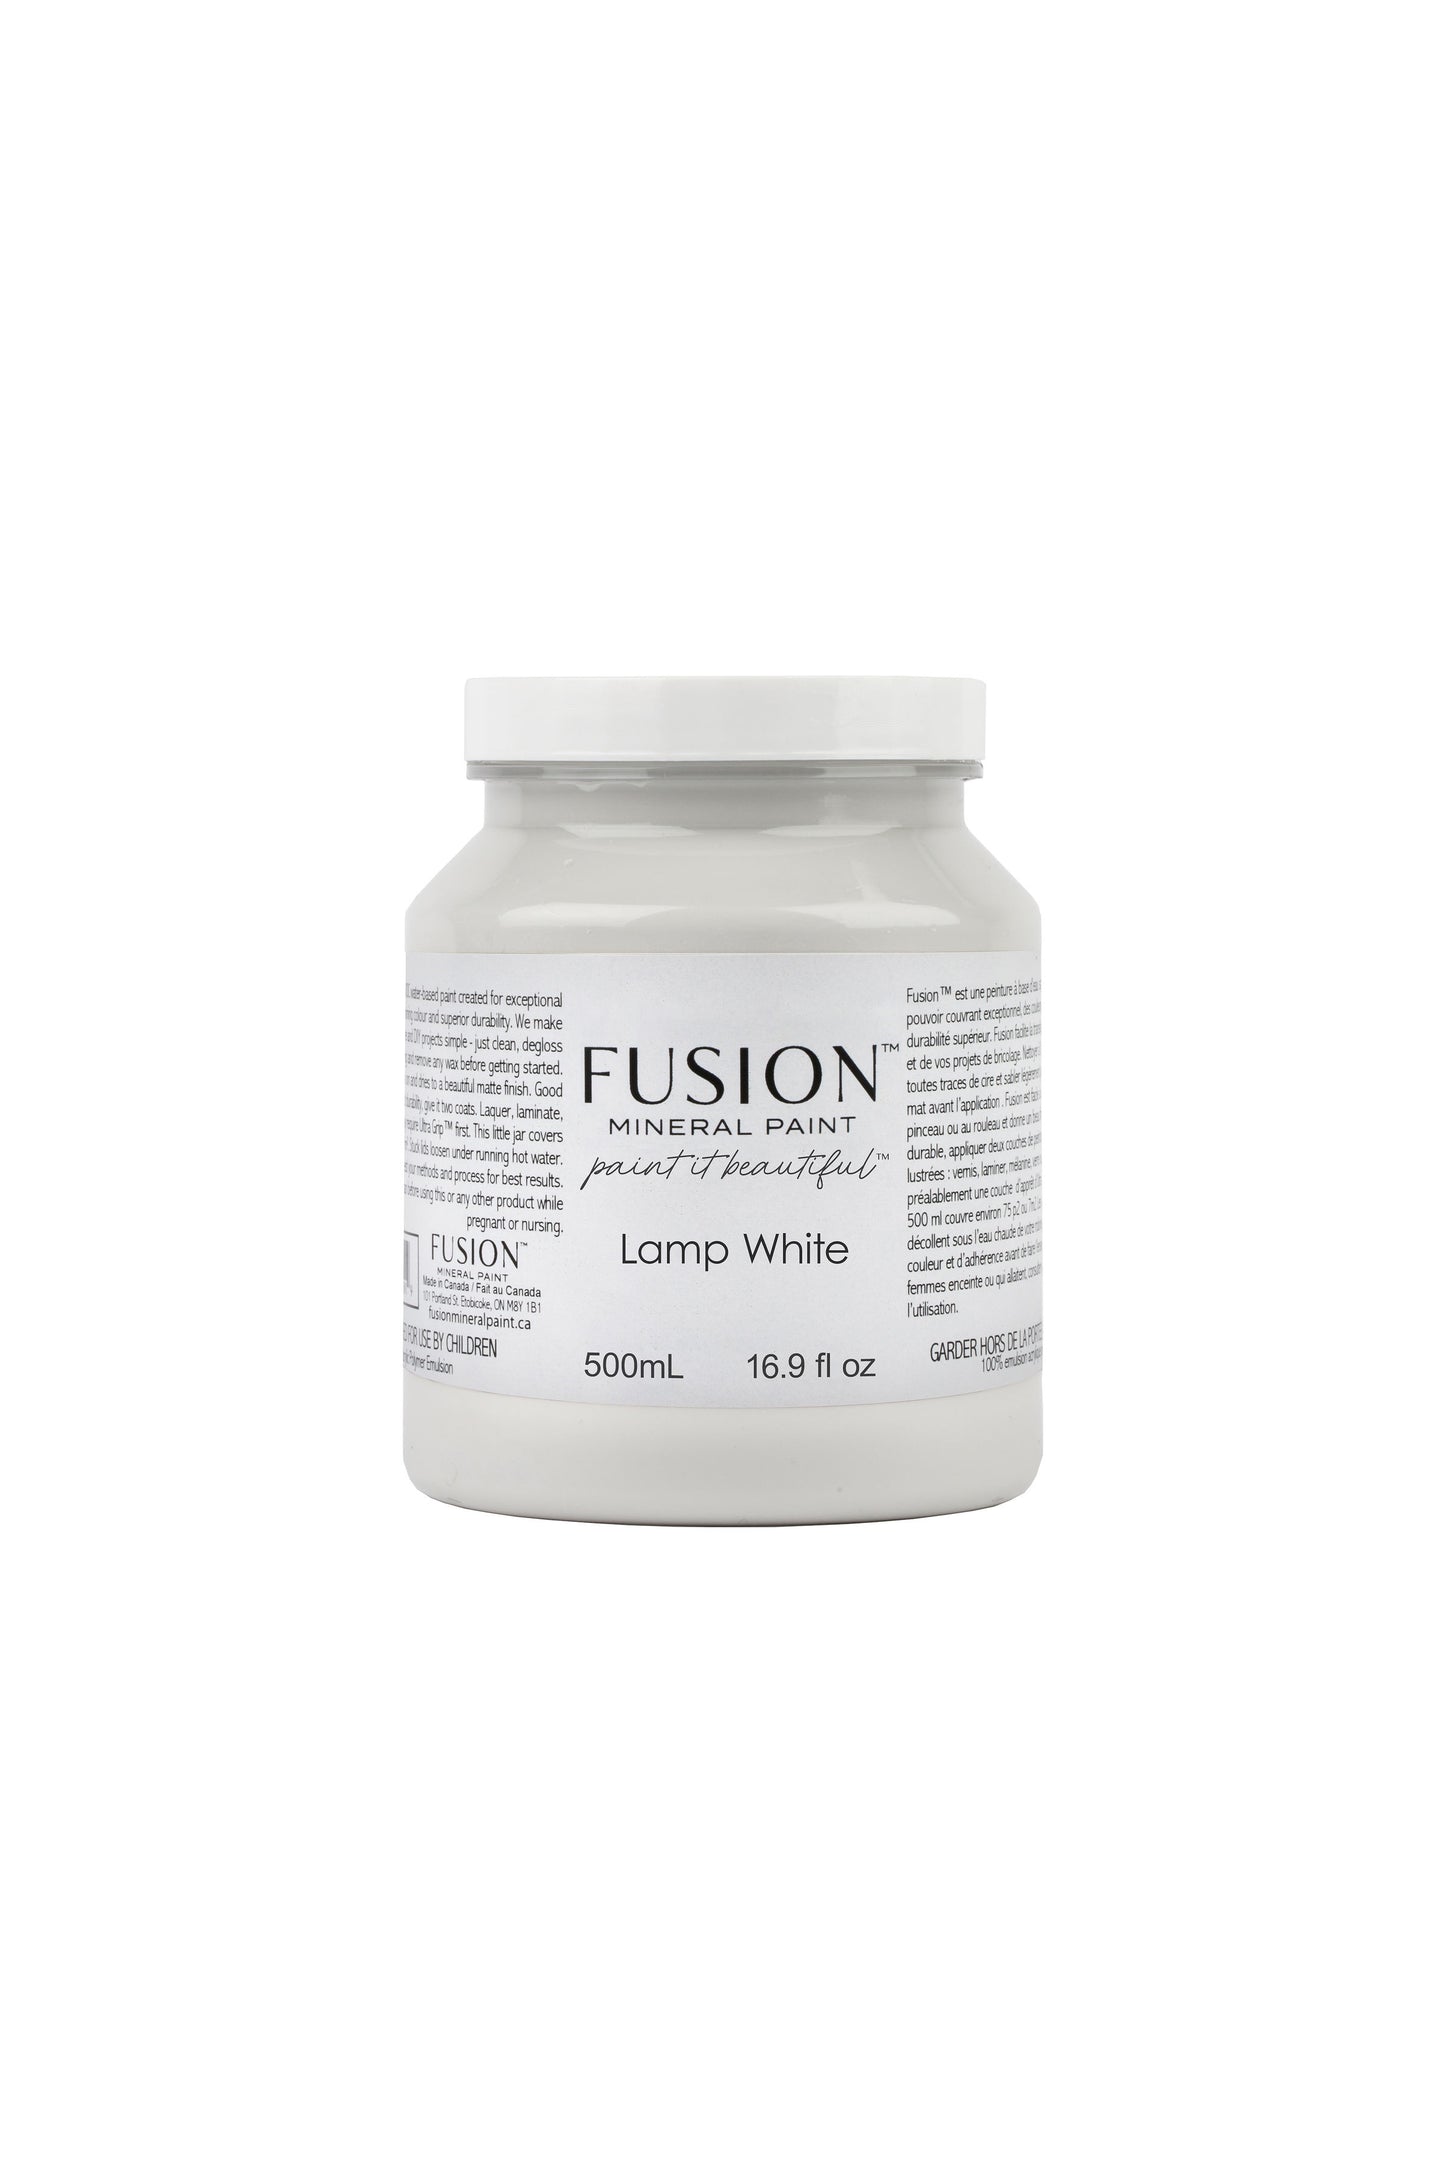 FUSION MINERAL PAINT- Lamp White